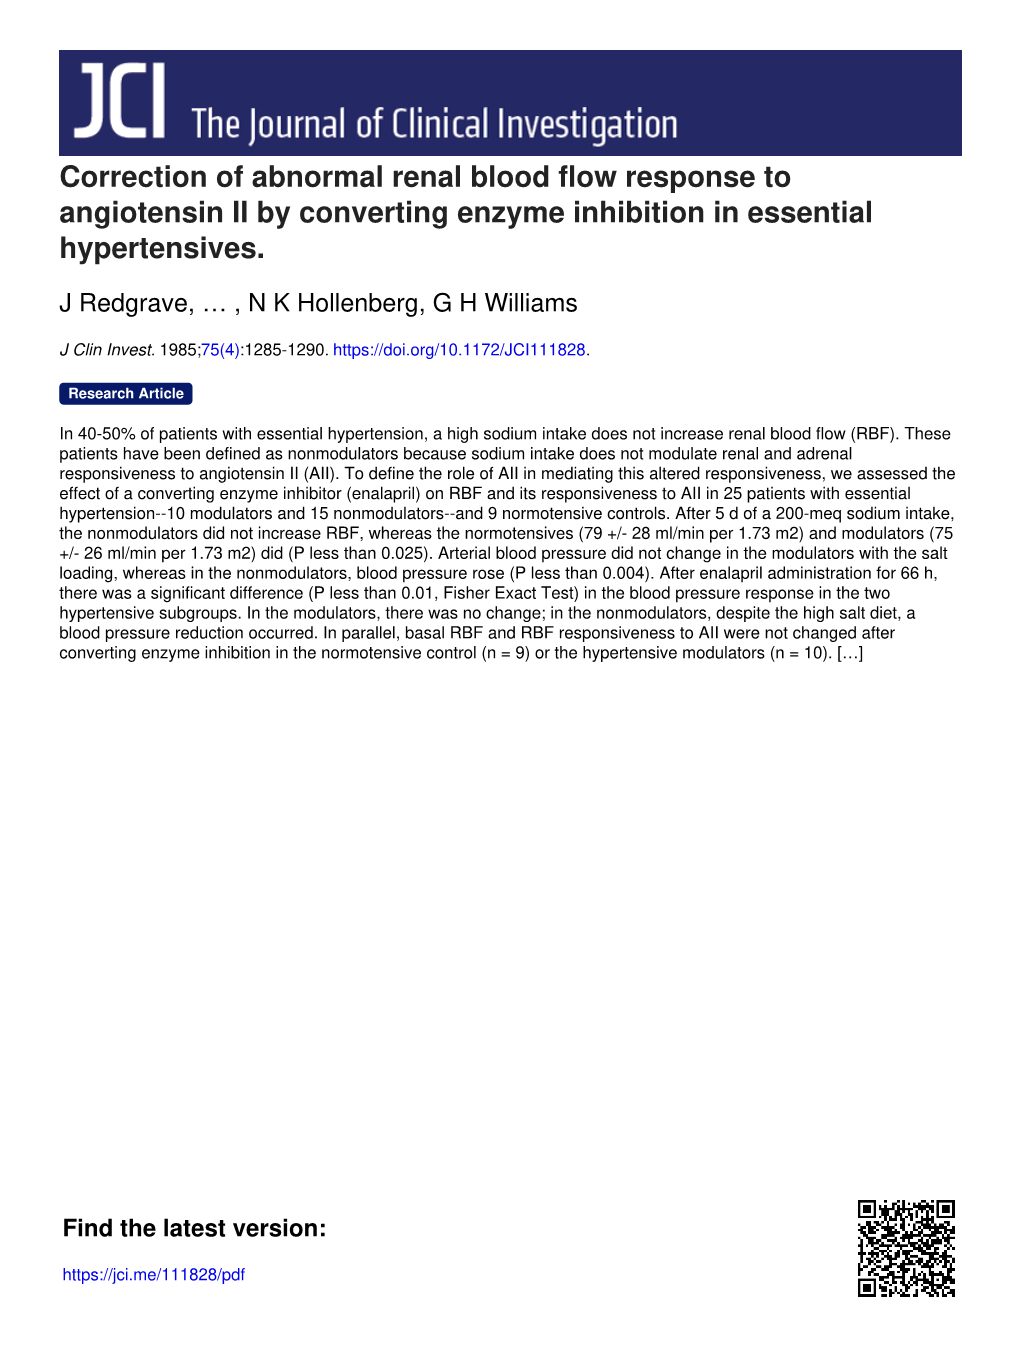 Correction of Abnormal Renal Blood Flow Response to Angiotensin II by Converting Enzyme Inhibition in Essential Hypertensives